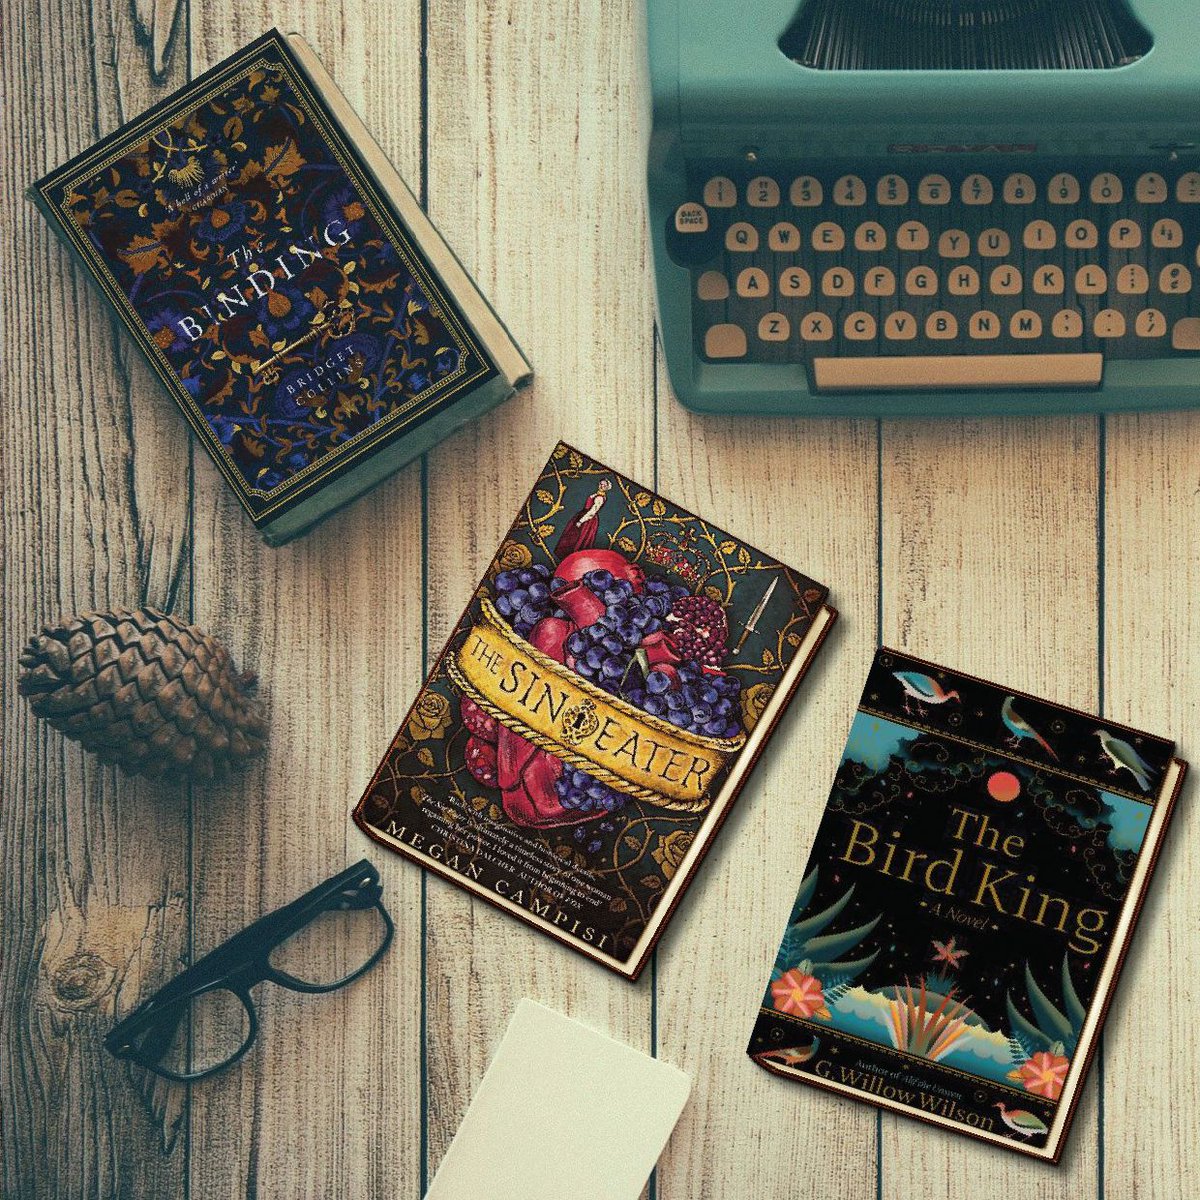 Some fascinating historical fiction with a twist of other-worldliness that I've read recently. Do you think a dose of the fantastical can make history more real?

#bookstagram #amreading #amreadingya #MythologyMonday #TheBinding #BridgetCollins #thesineater #thebirdking